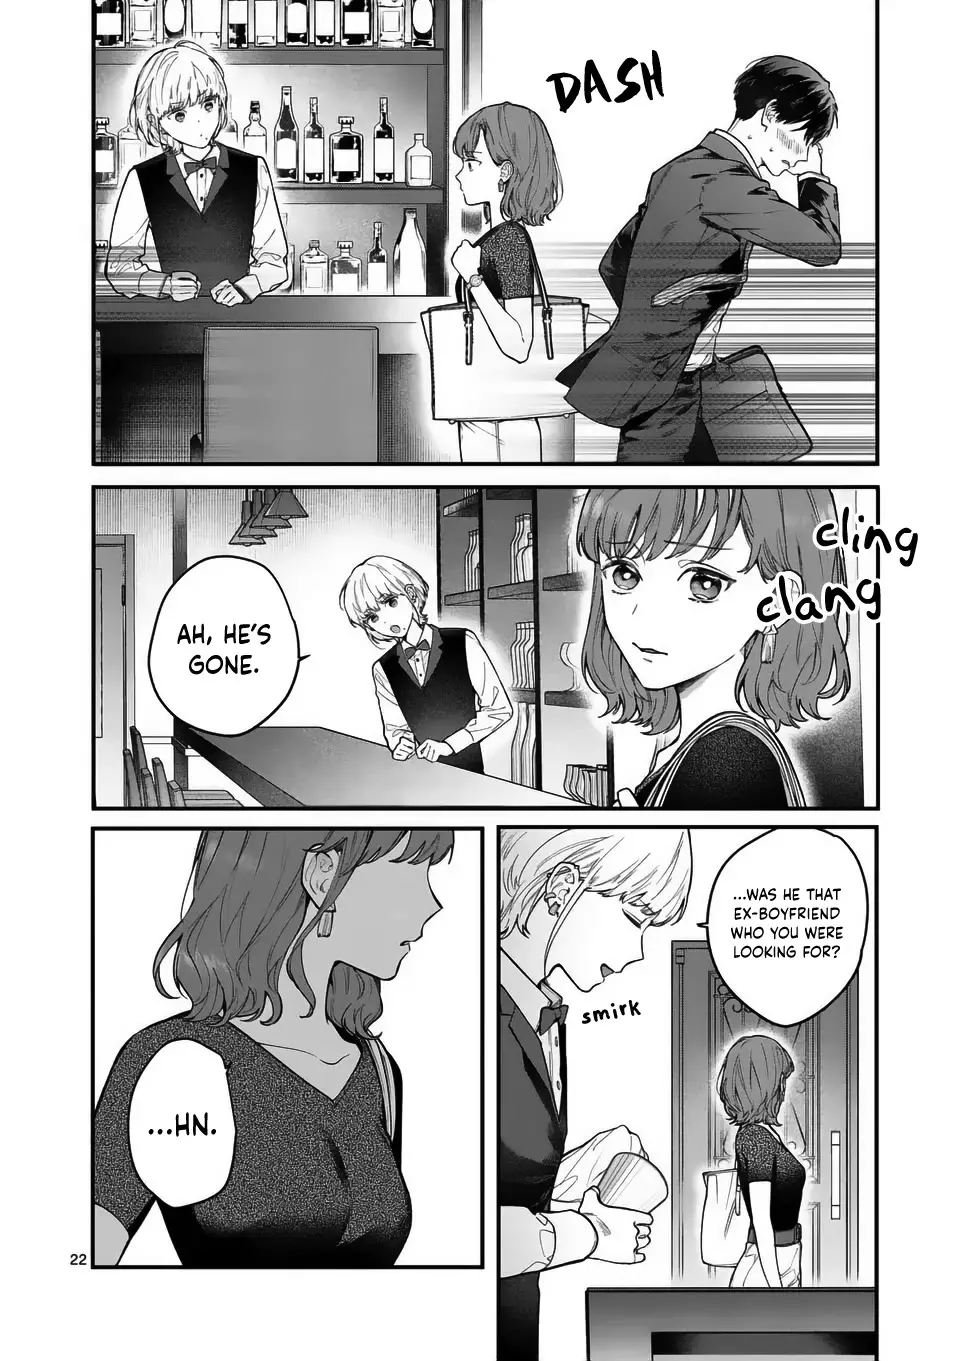 Is It Wrong To Get Done By A Girl? - 8 page 23